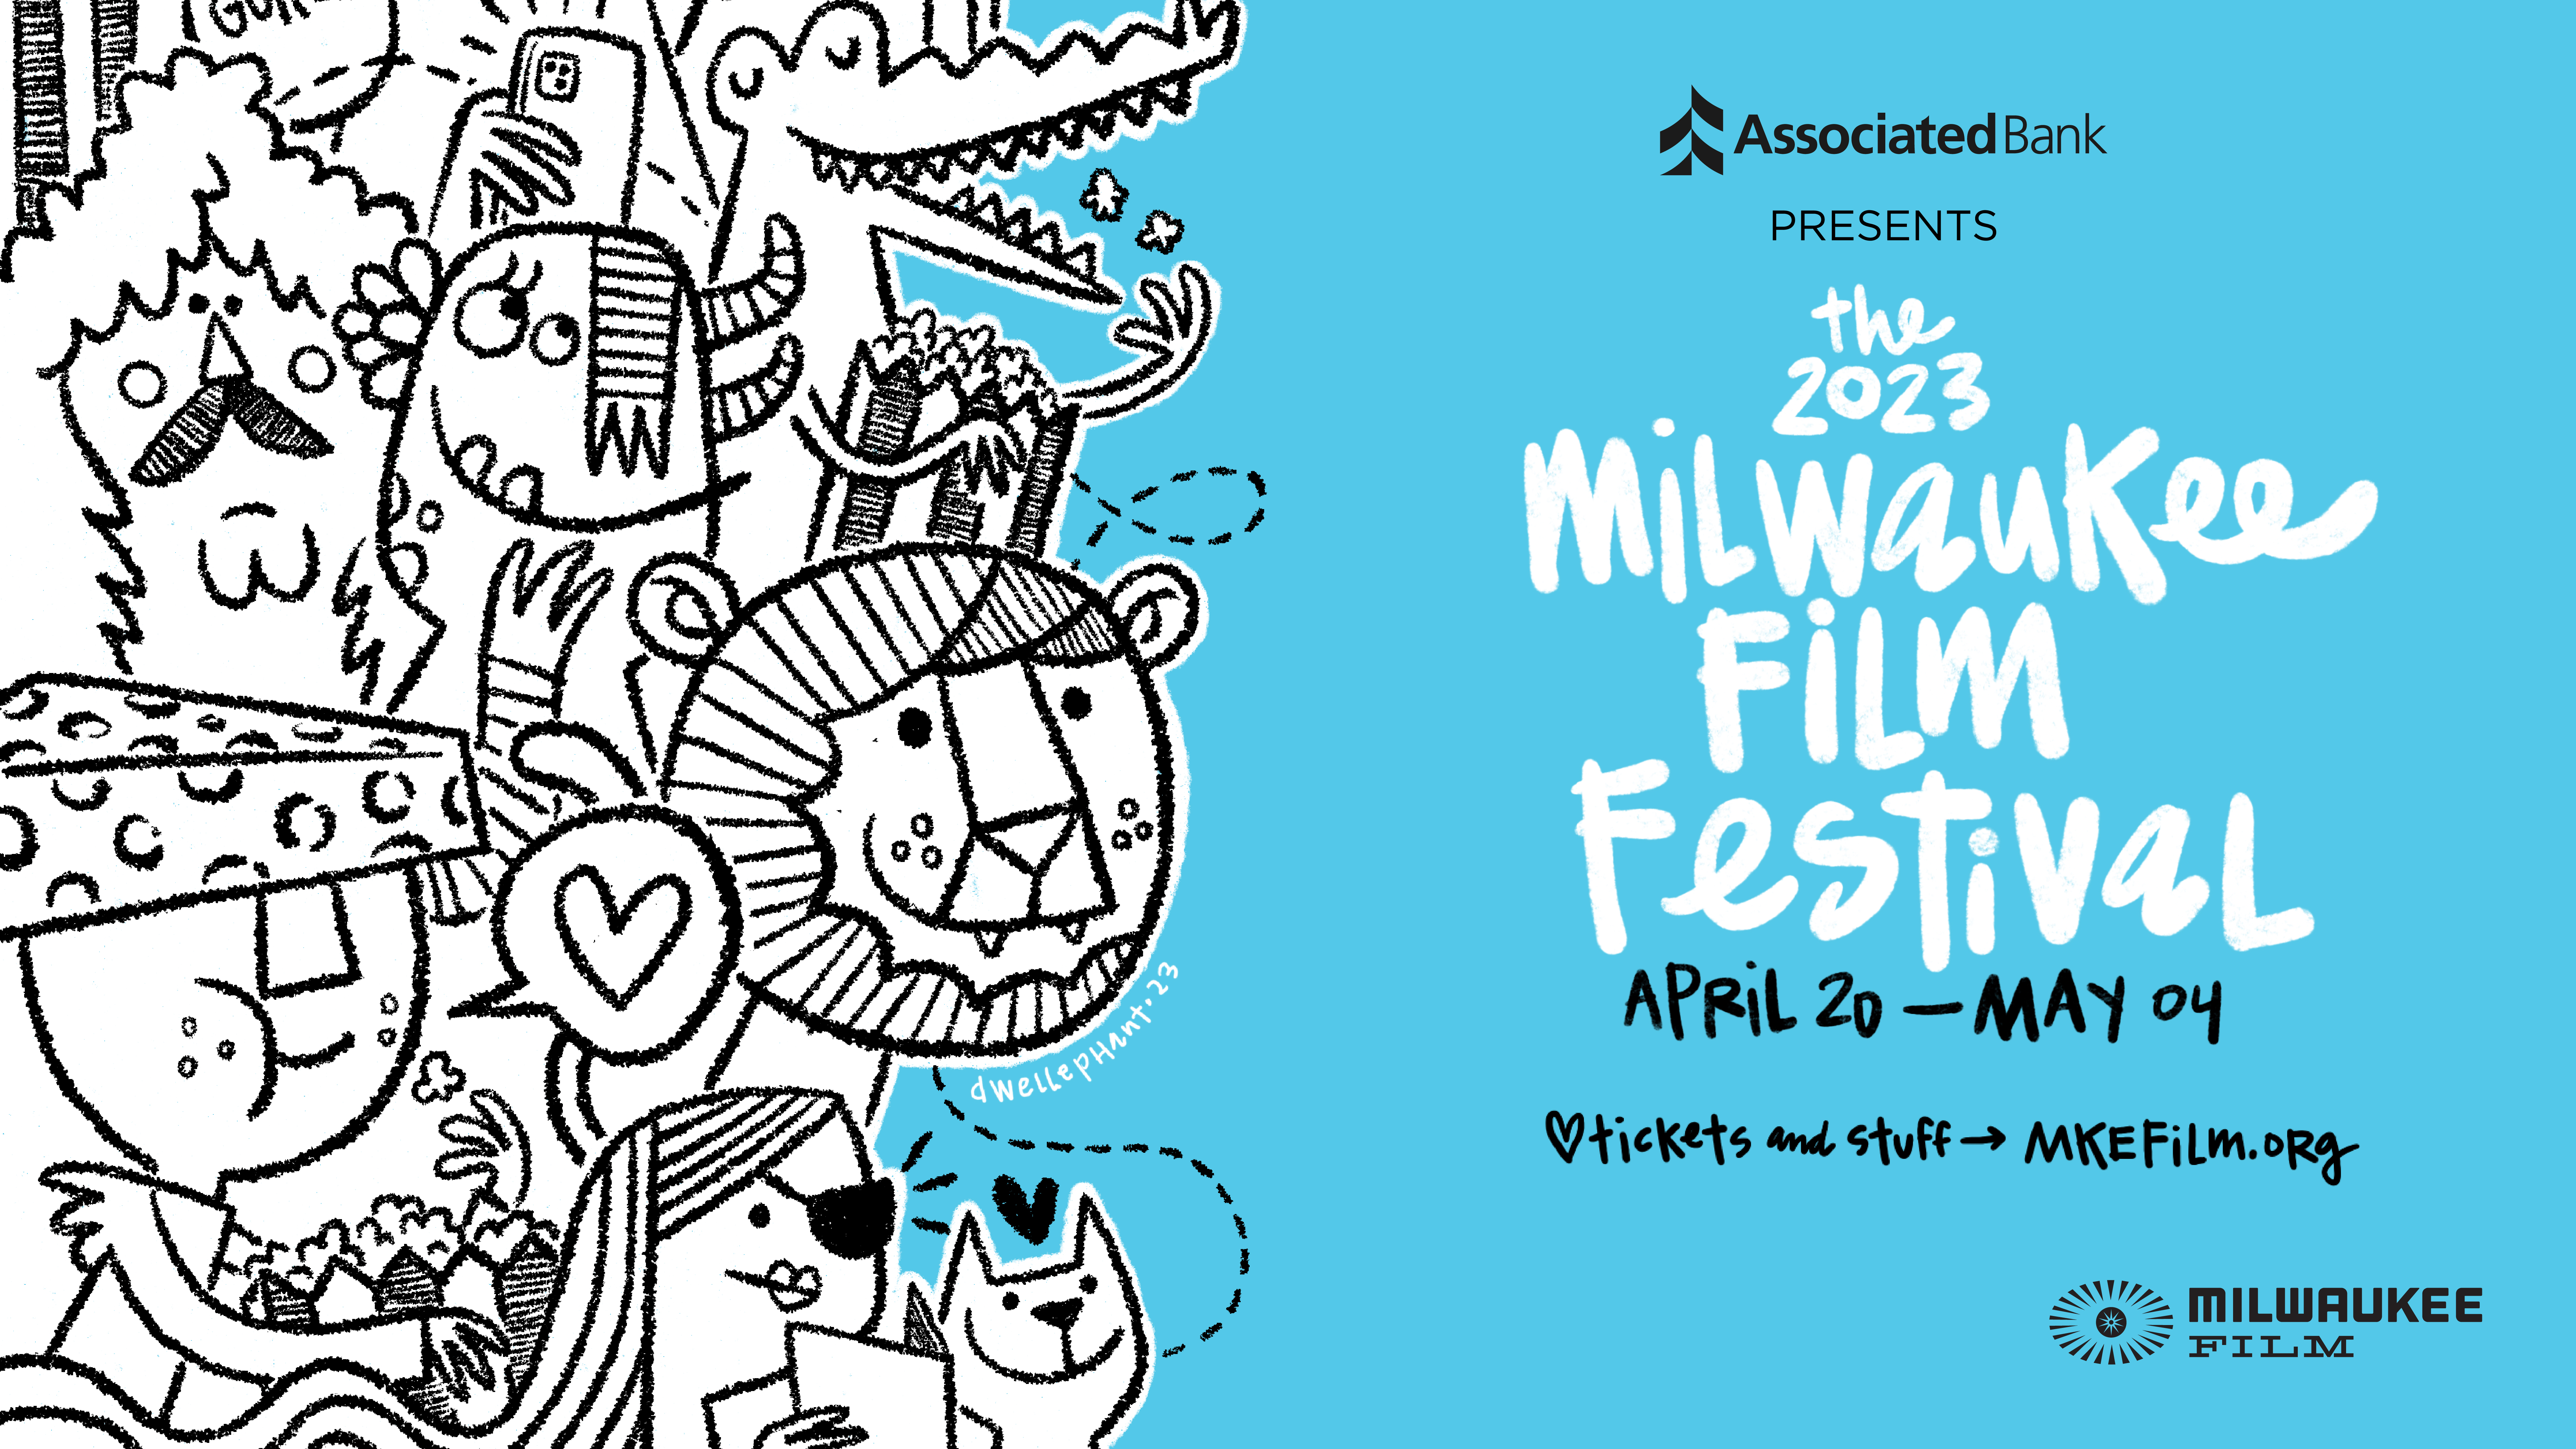 The 2023 Milwaukee Film Festival runs Thursday through May 4. The full lineup and ticket information are online at mkefilm.org/mff.